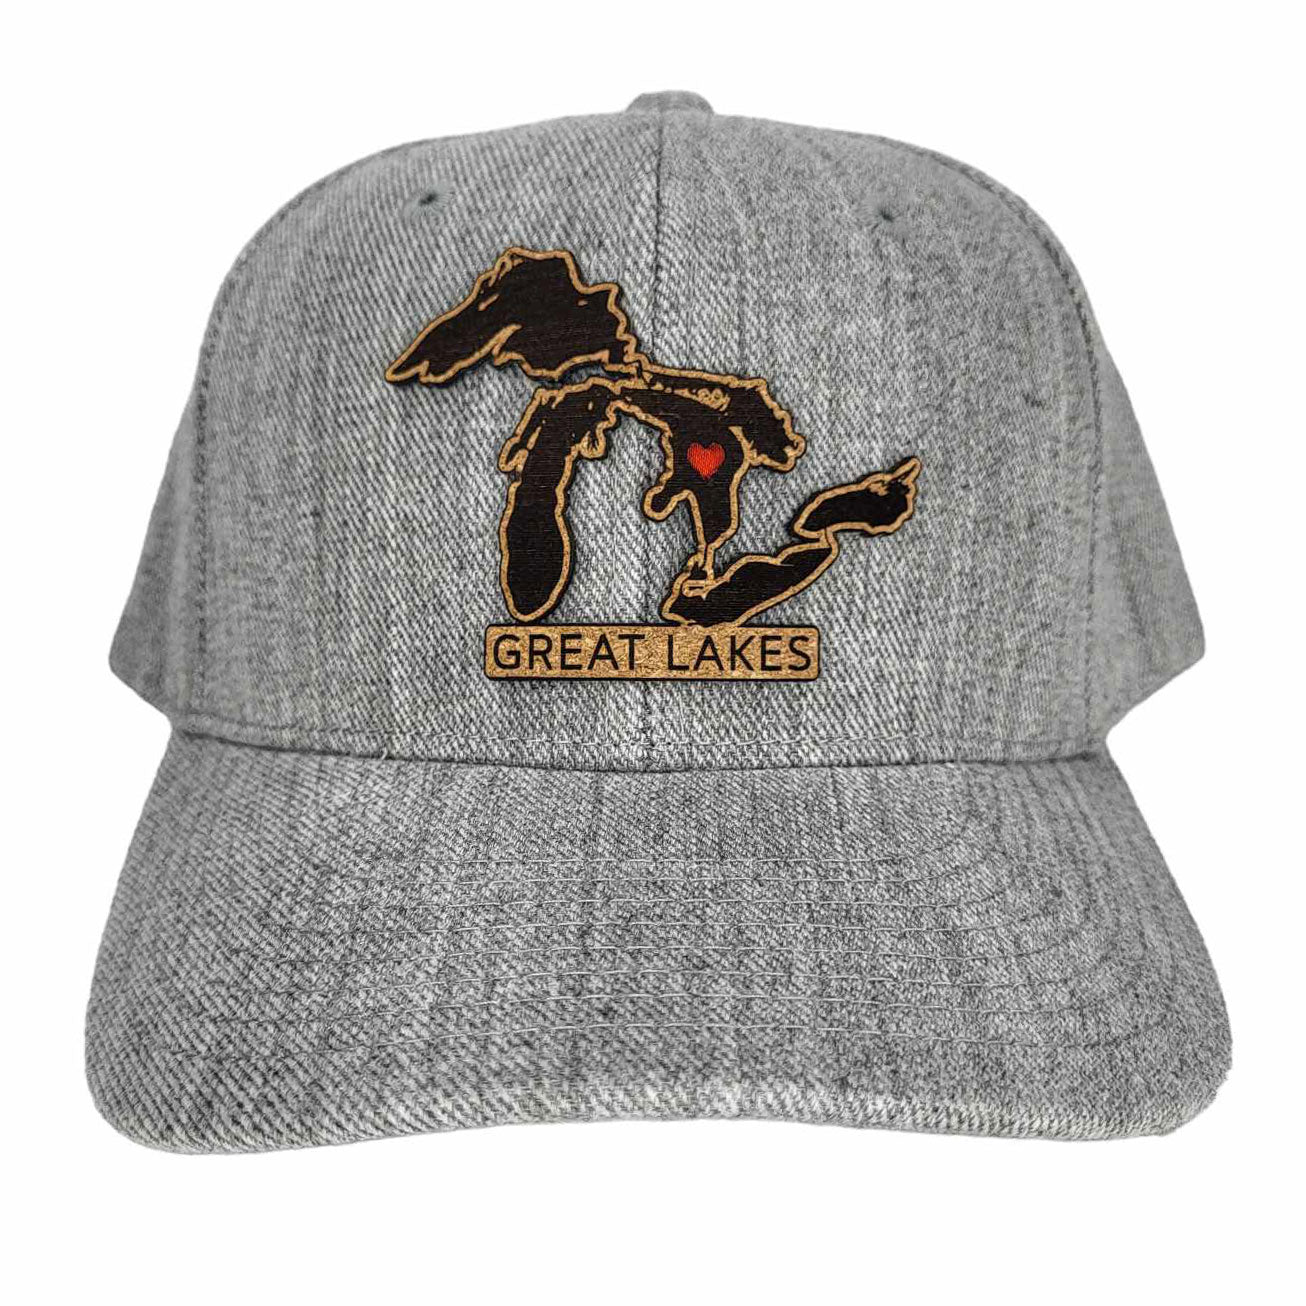 The Great Lakes Hat